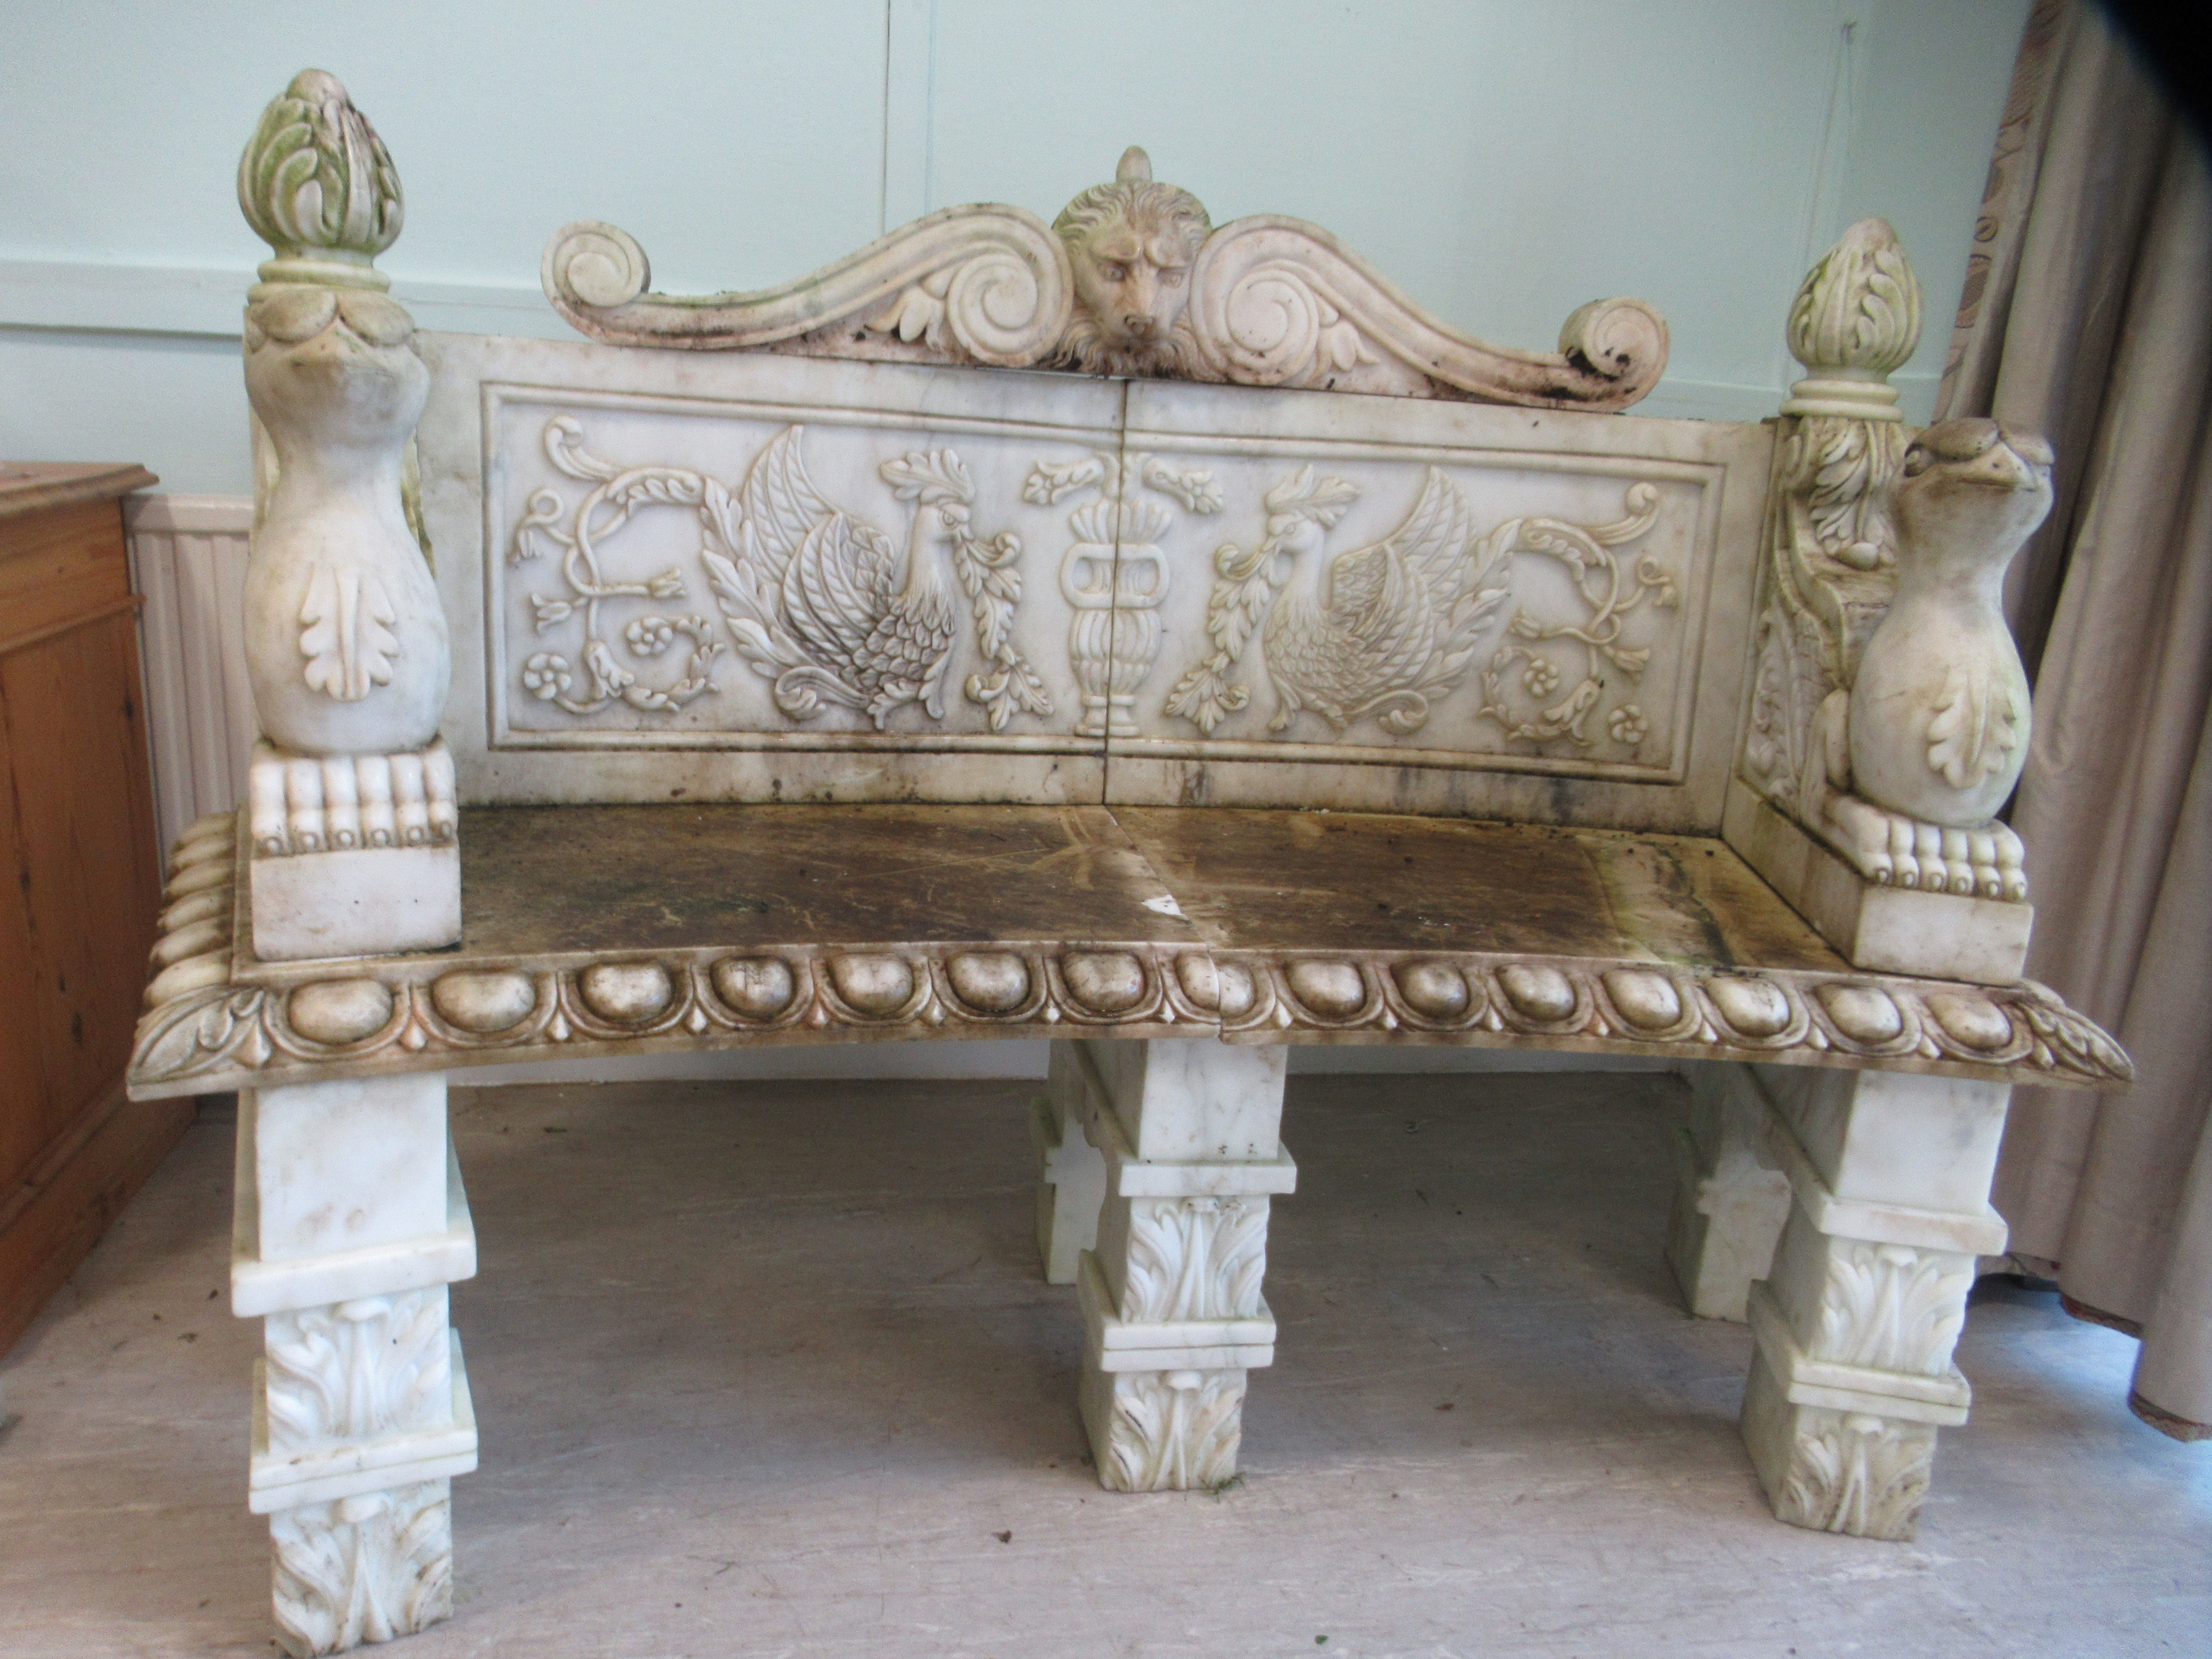 A carved marble terrace seat of in-curved design, featuring mythical birds, a lions' head and